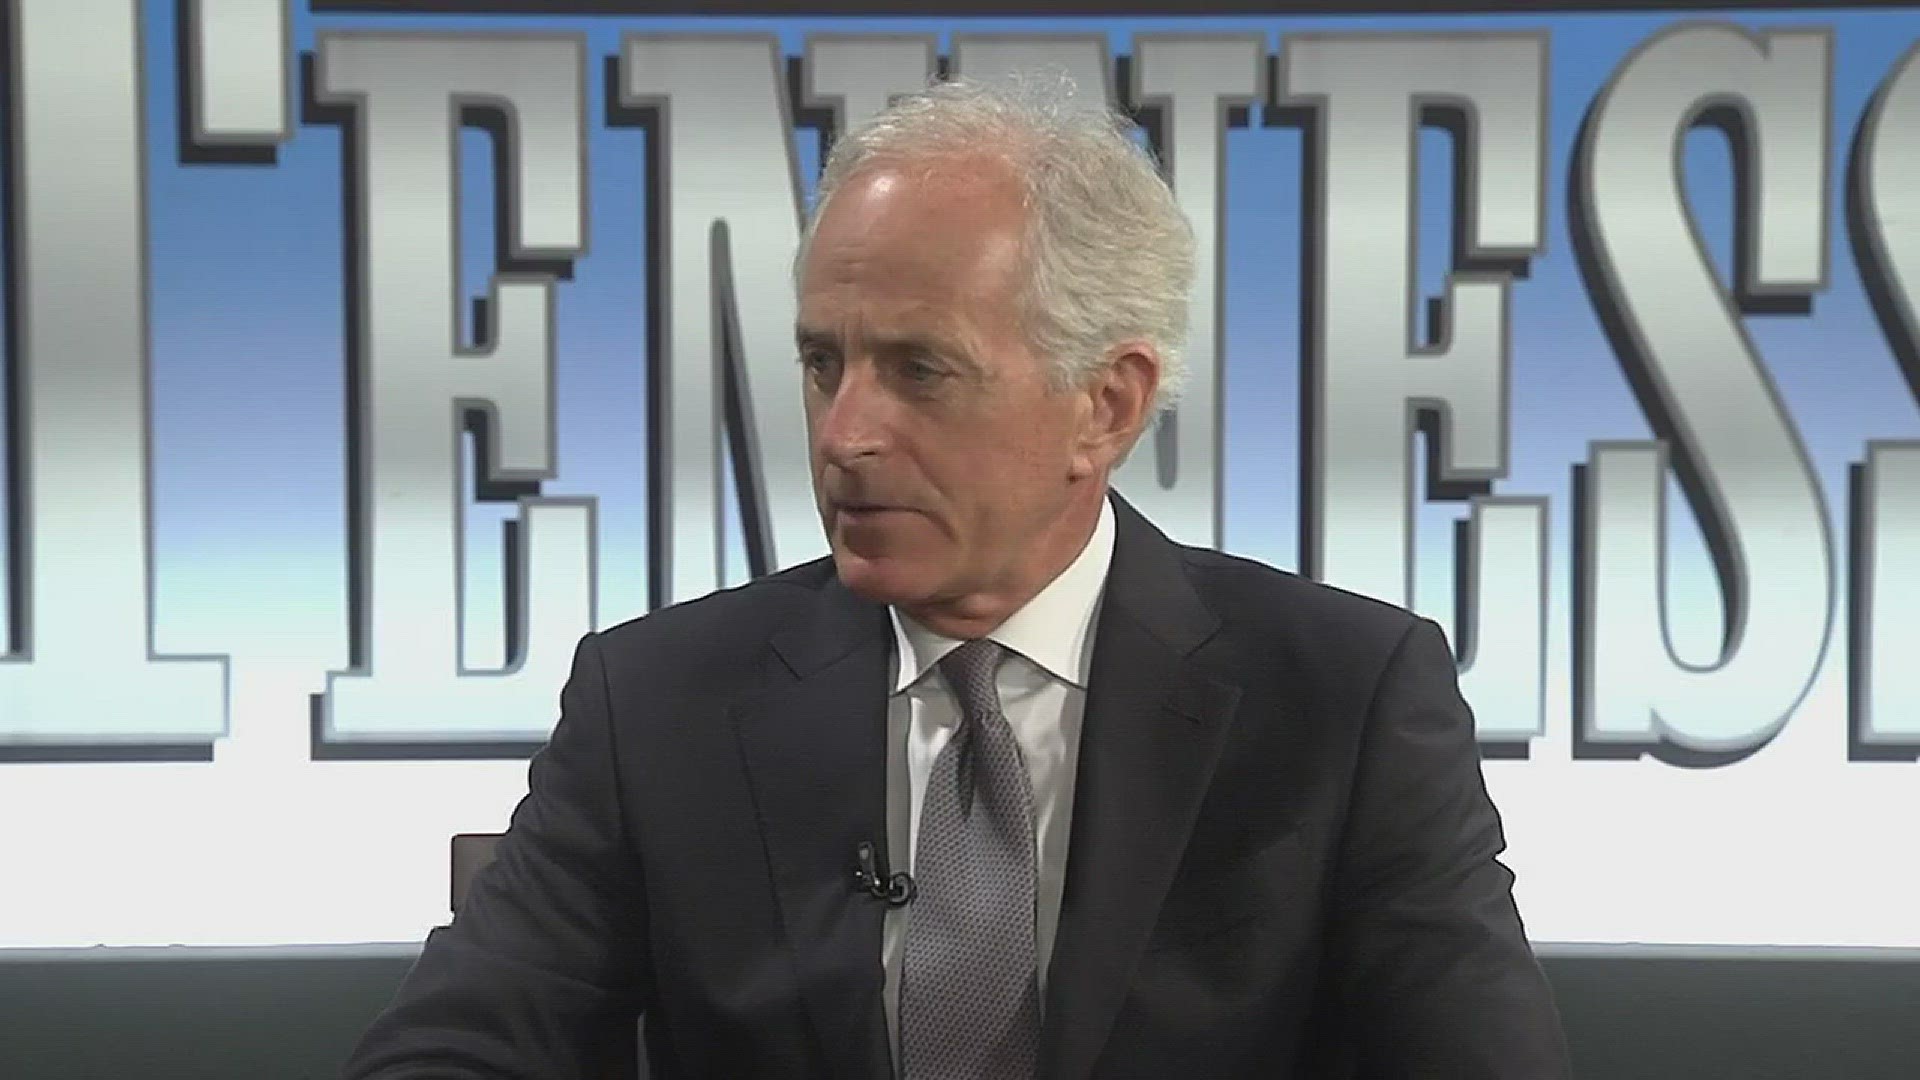 Sen. Bob Corker talks about foreign policy and domestic matters.